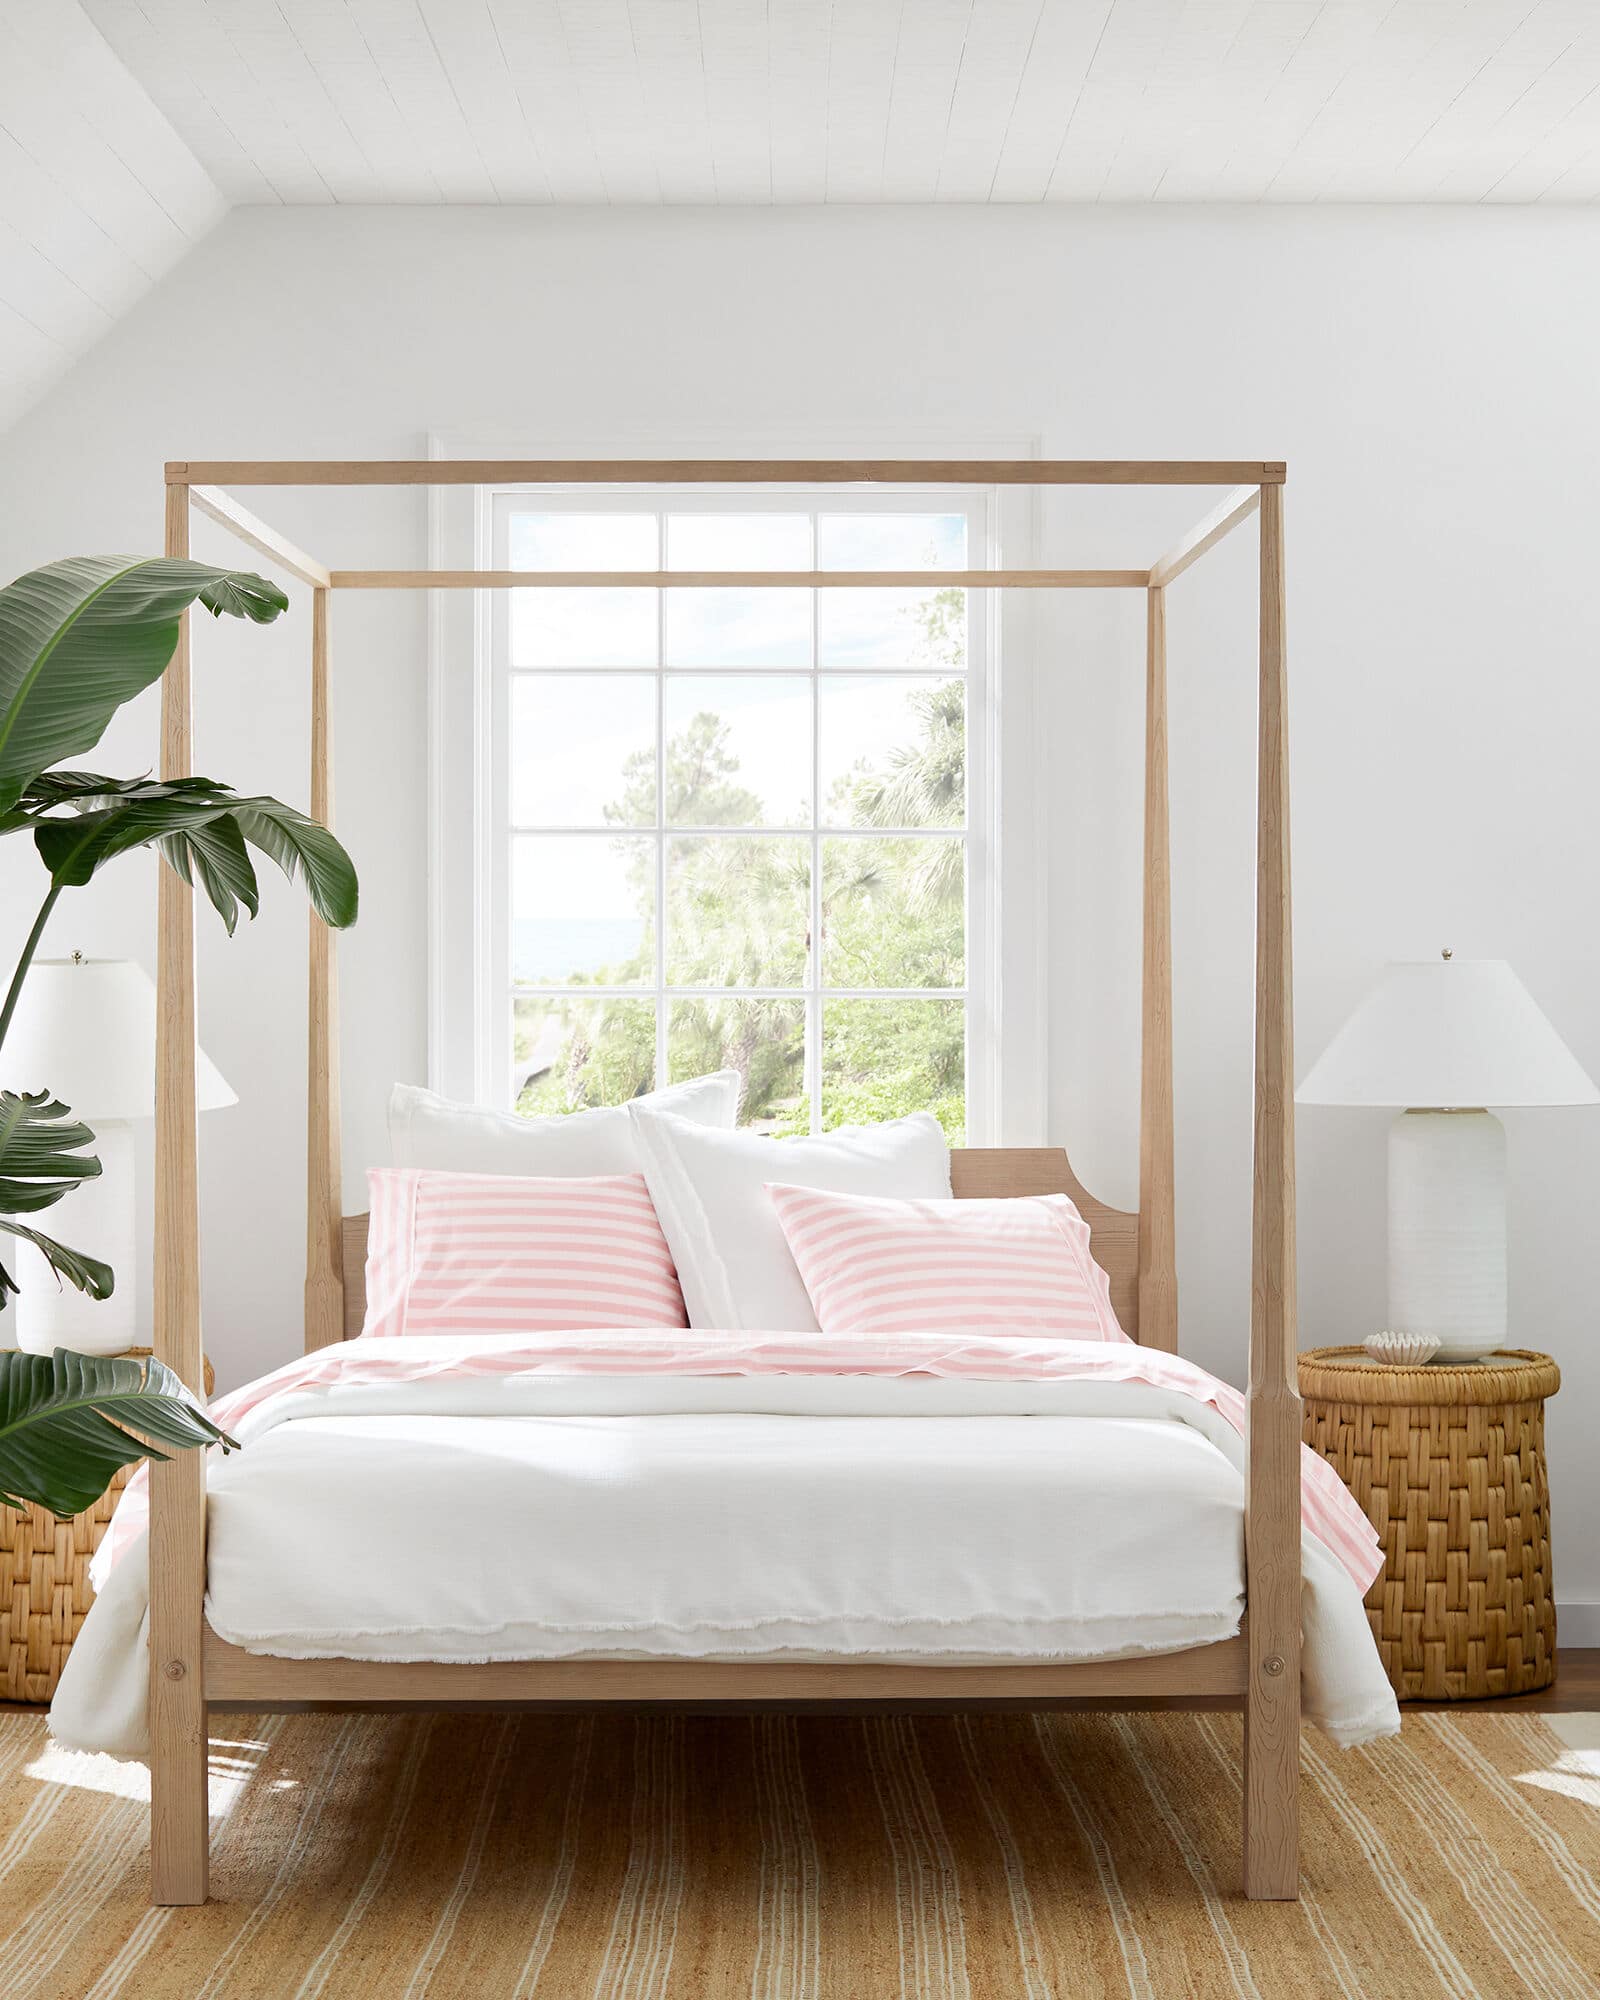 Serena & Lily Whitaker Four Poster Bed | Sunbleached Pine.| bedroom refresh - guest room